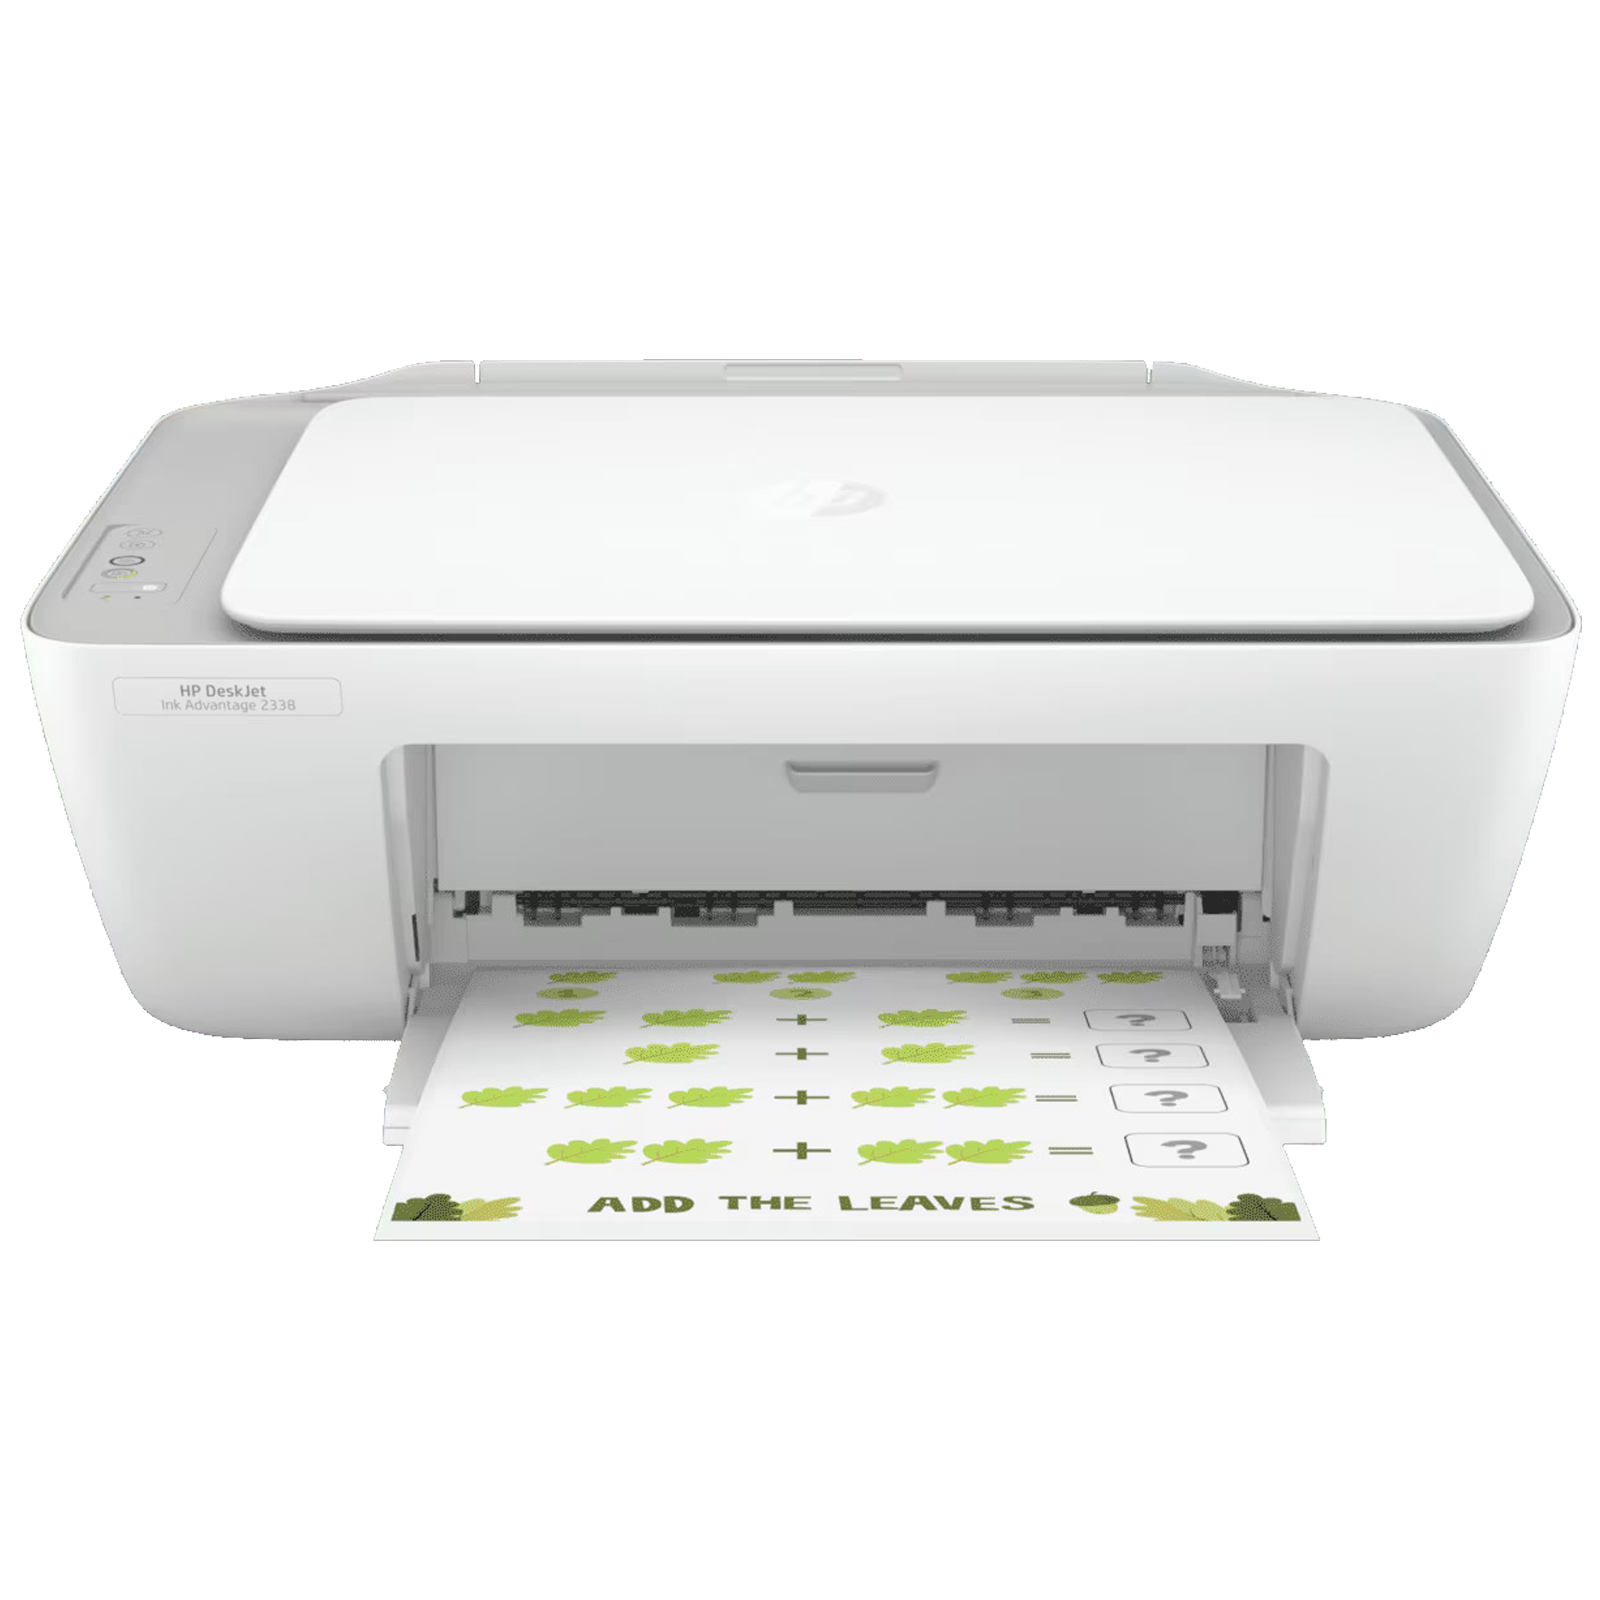  HP DeskJet Ink Advantage 2338 Wired Color All-in-One Inkjet Printer (Auto-Off Technology, 7WQ06B, White)